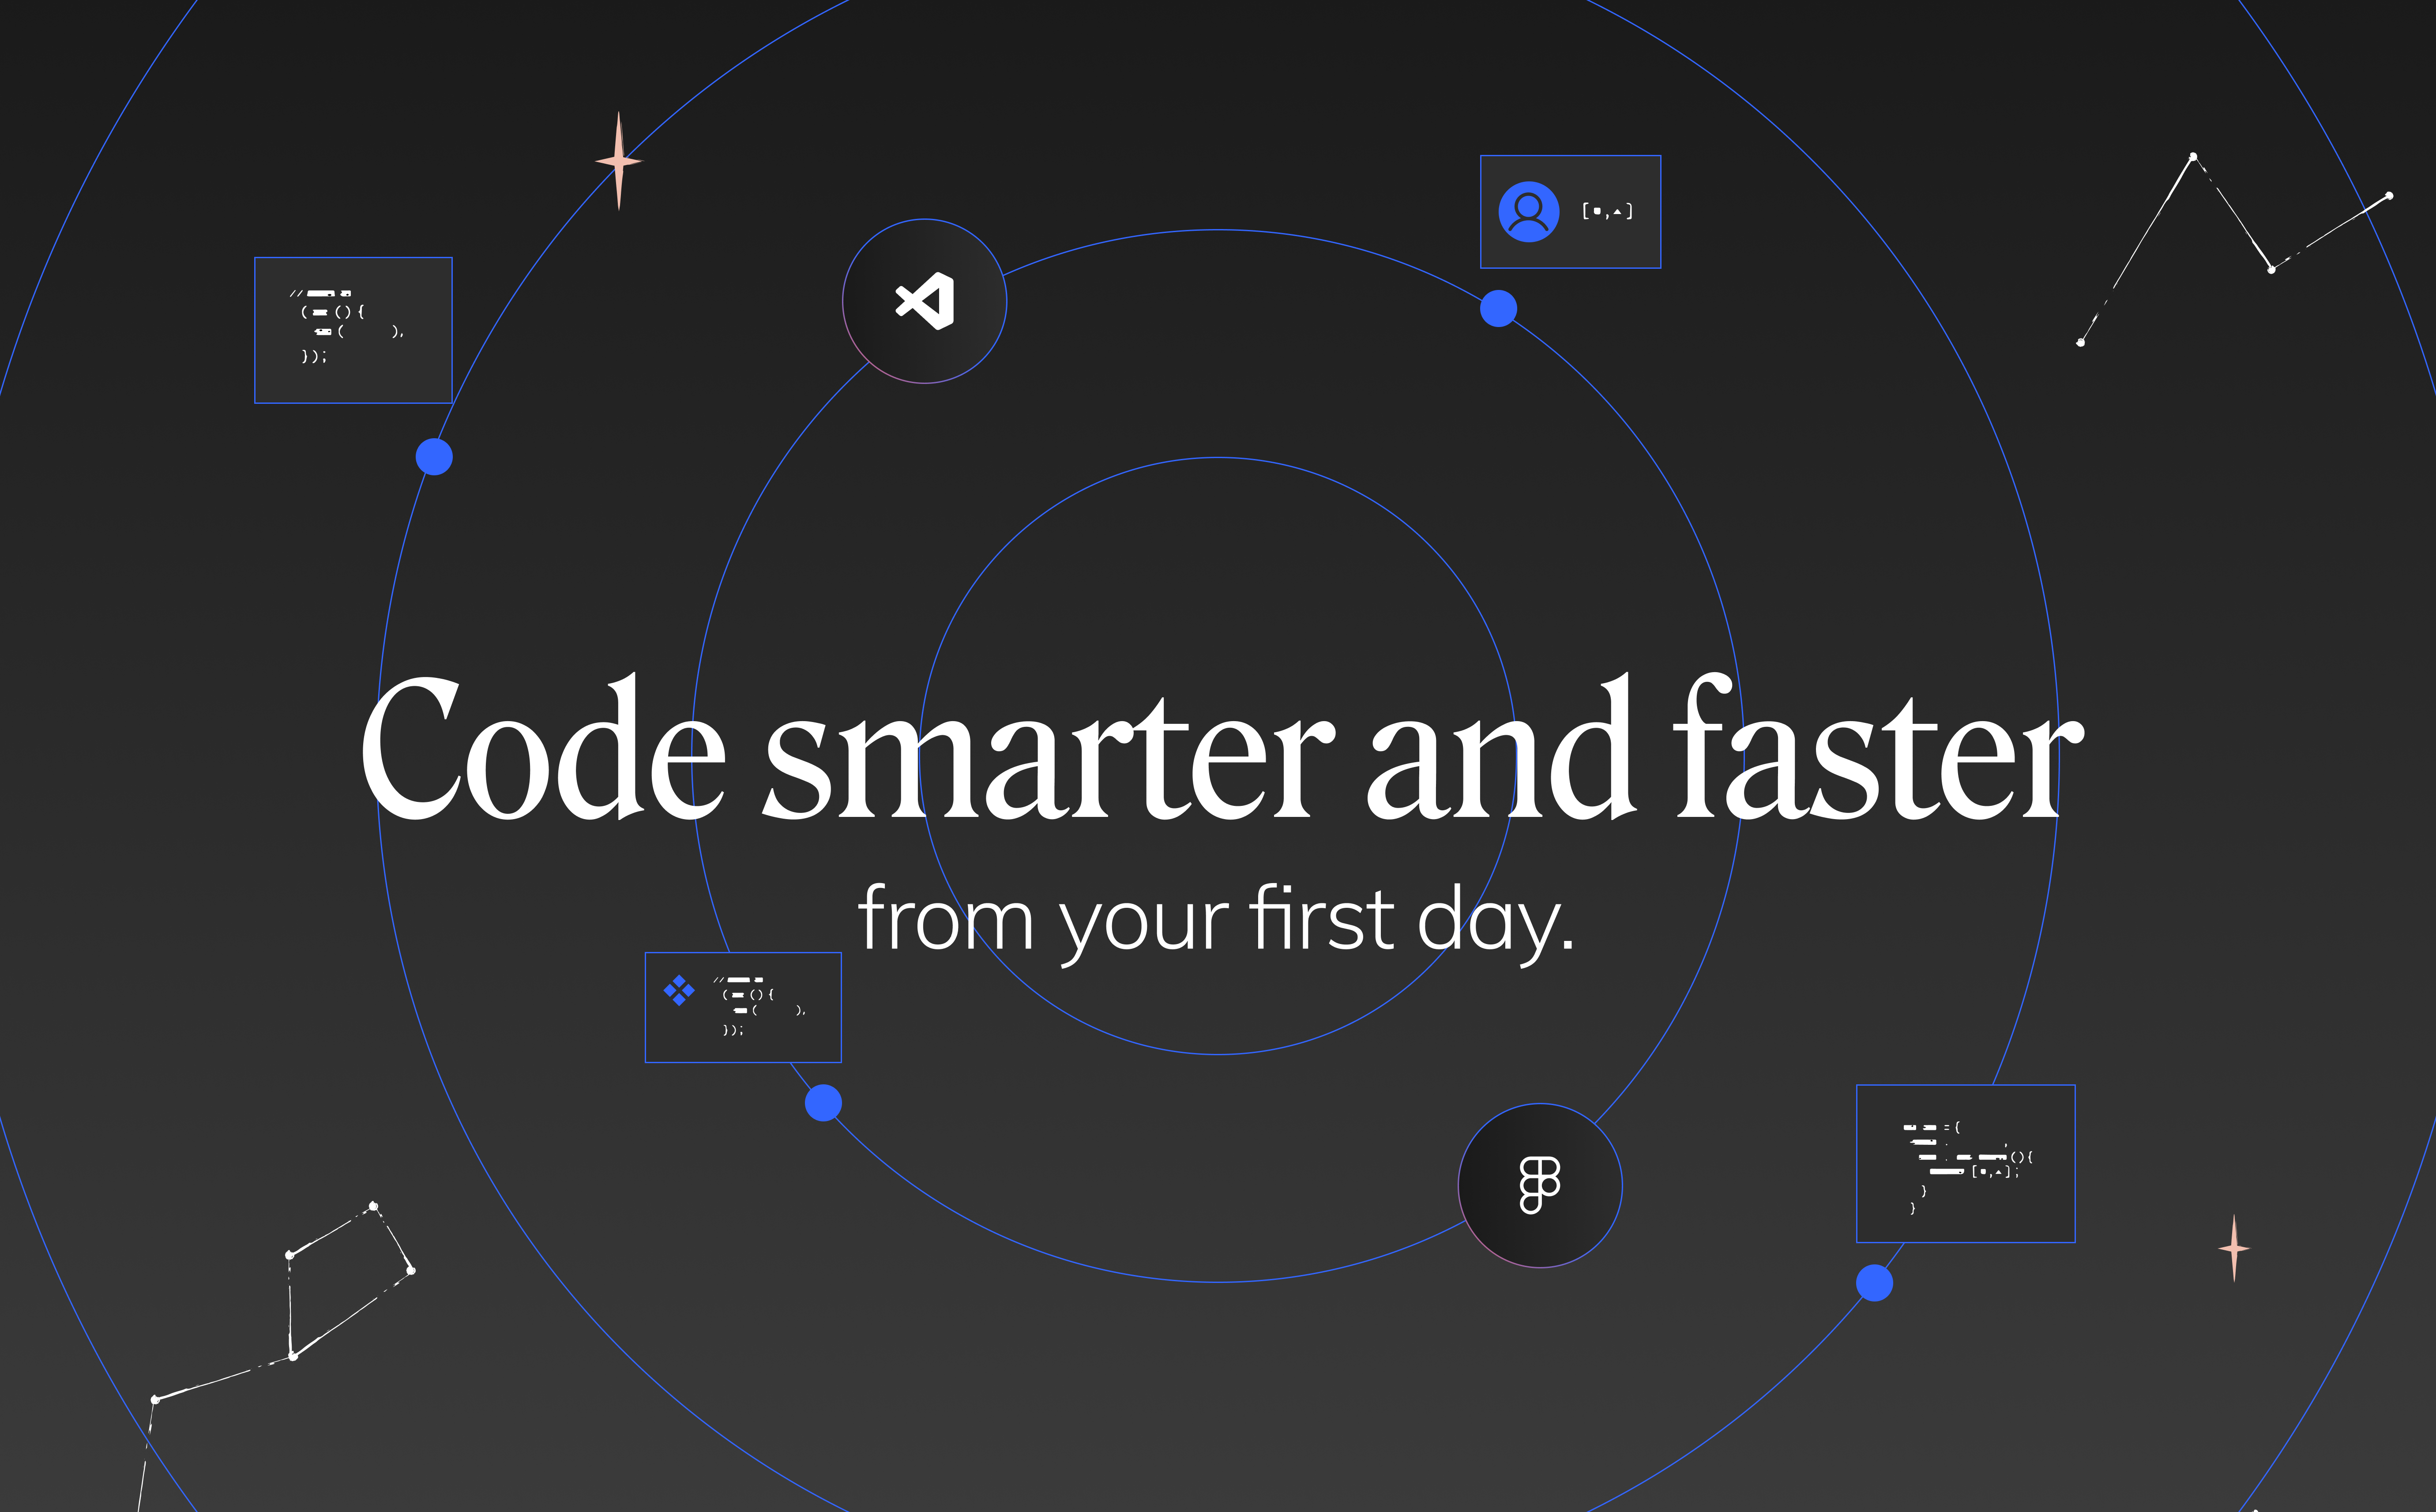 Code smarter and faster from your first day